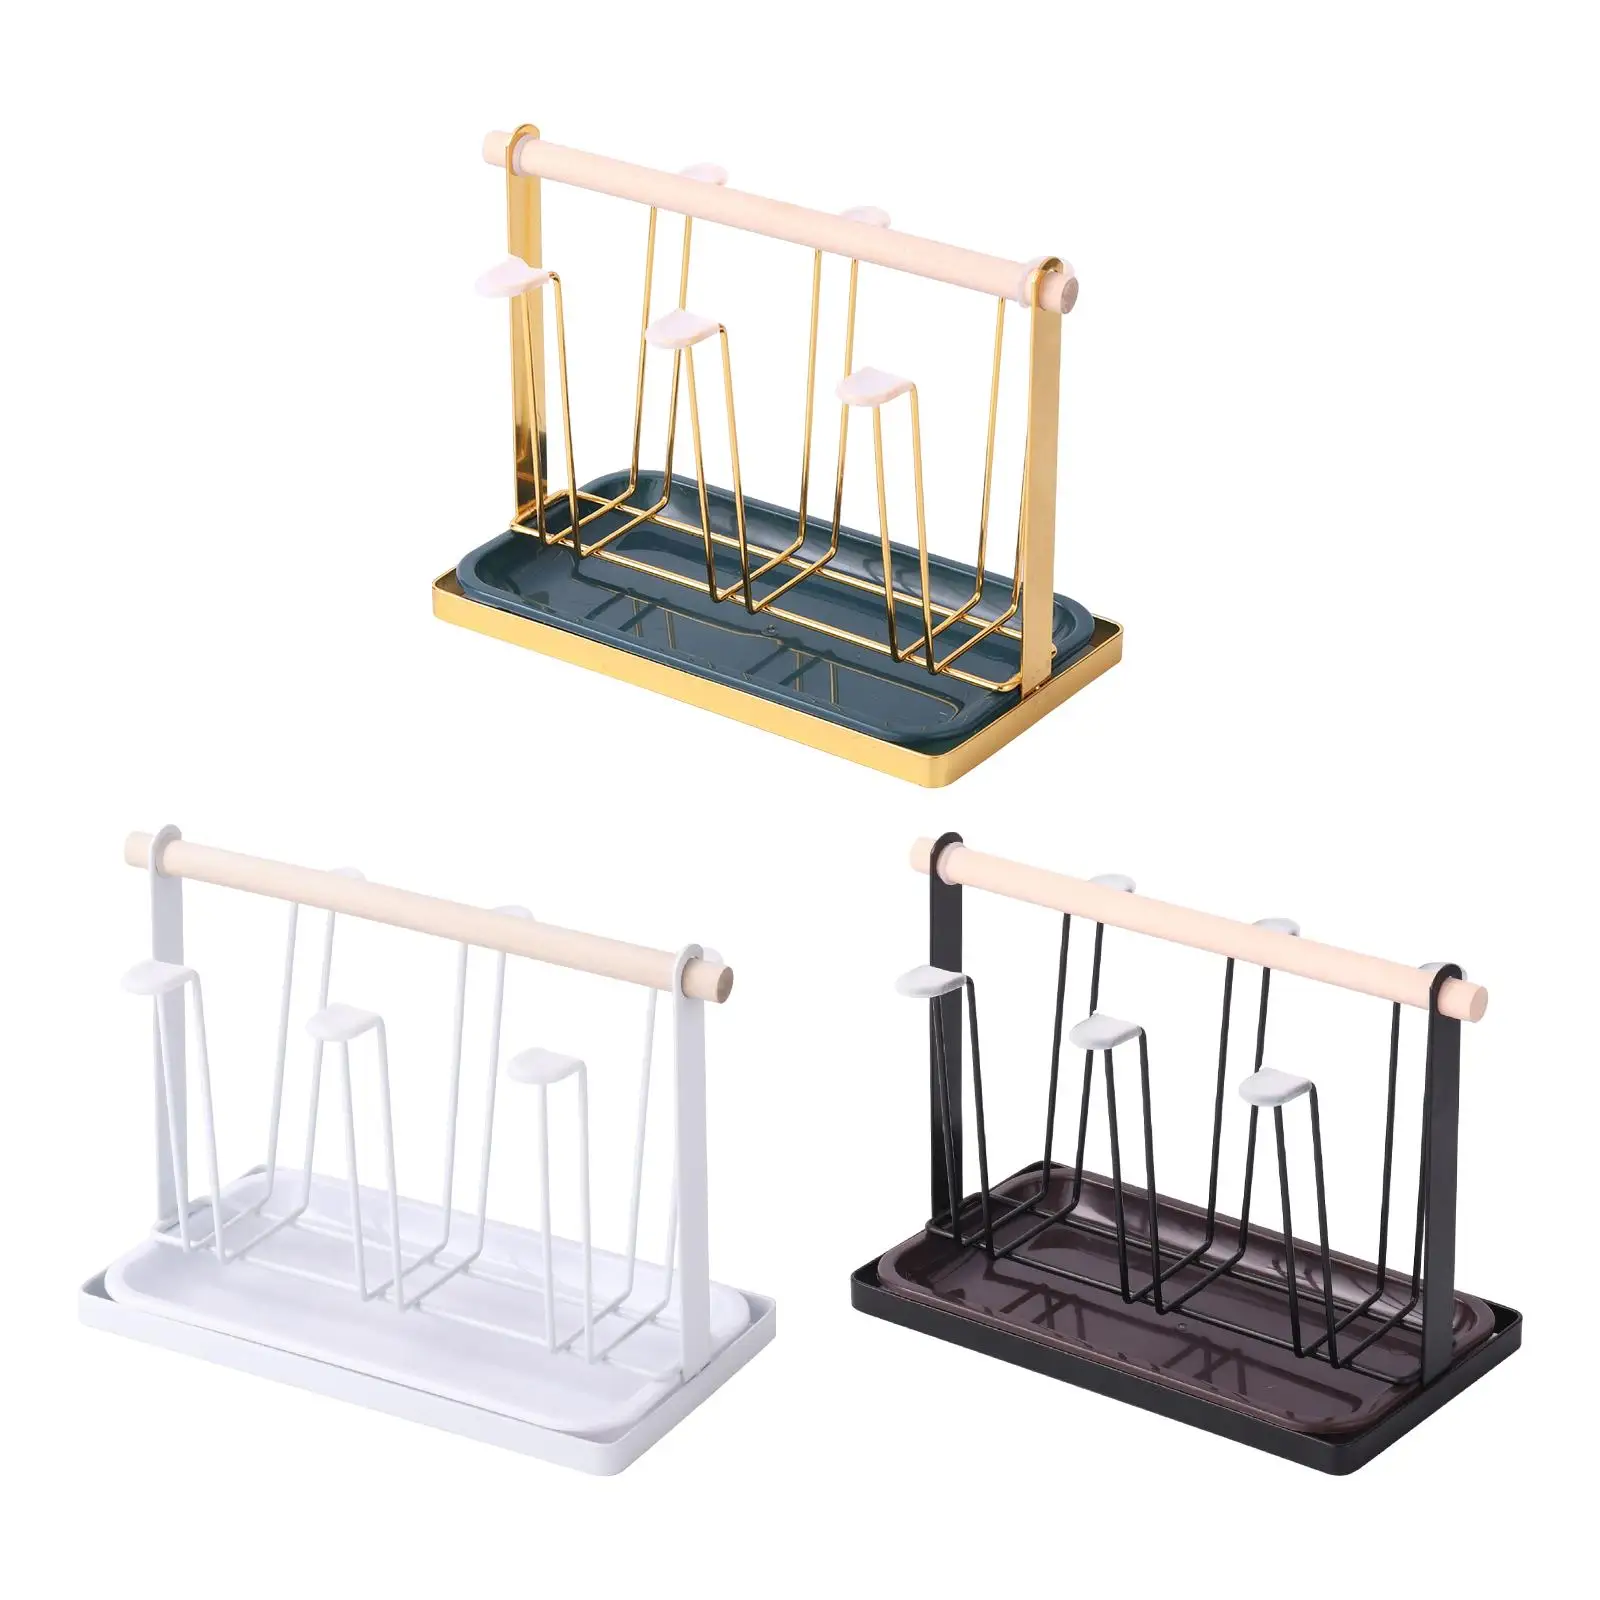 Luxury Iron Mug Holder Cup Rack 6 Cup Holder Hanger with Tray Glass Cup Stand Tea Cup Storage Shelf for Glasses Mugs Countertop